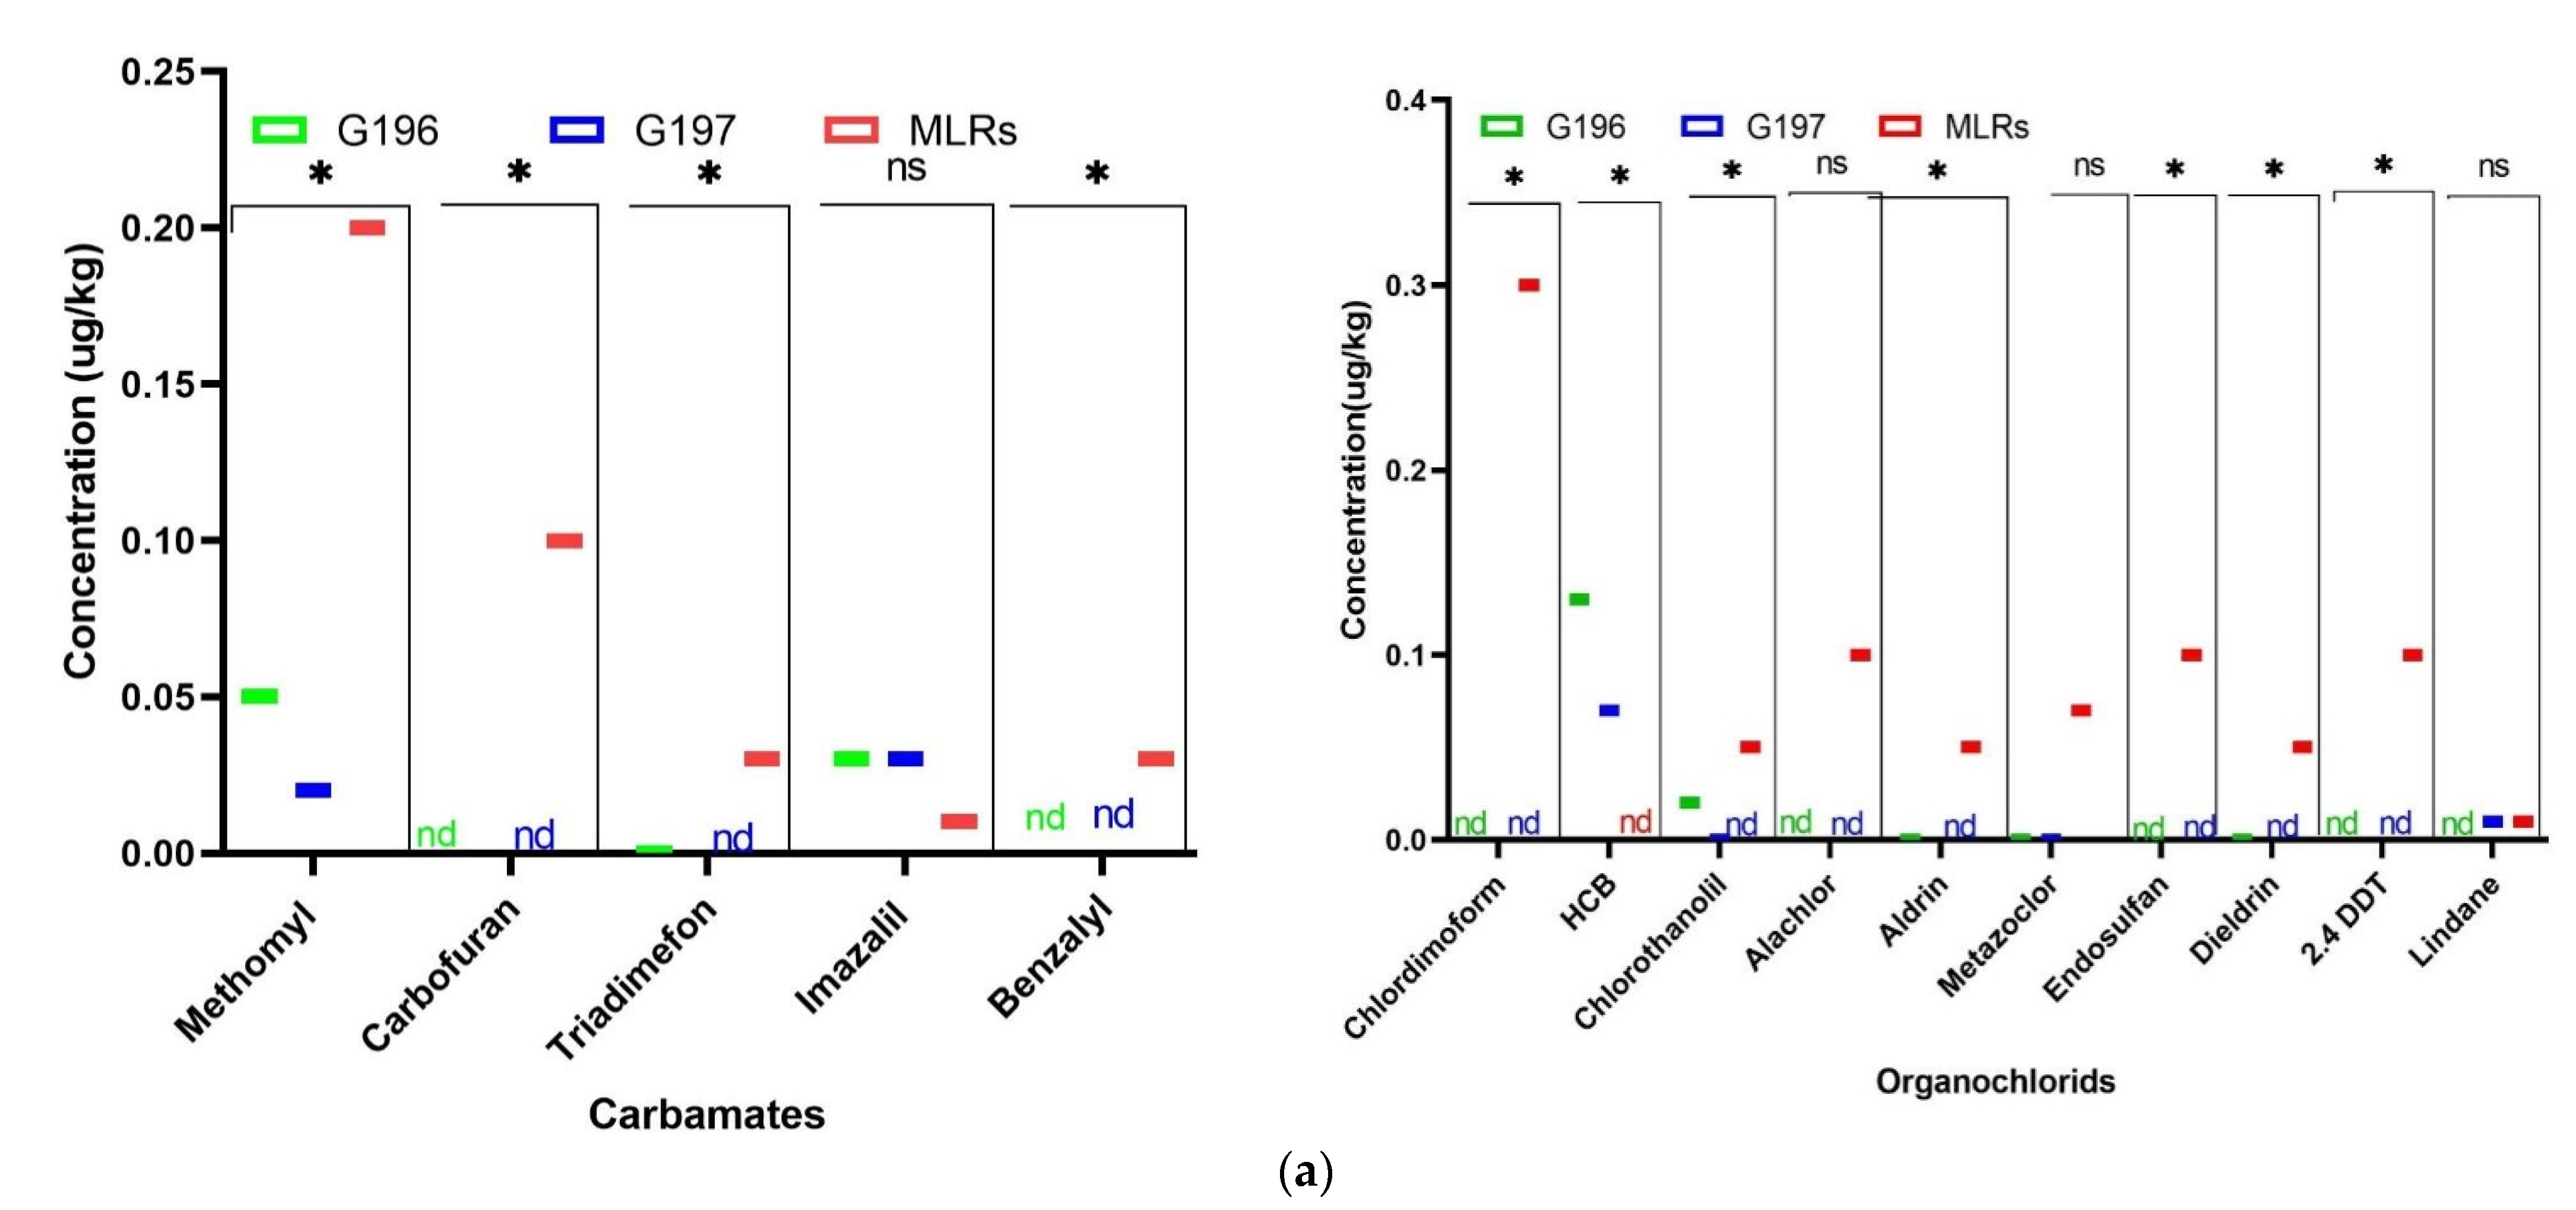 Molecules | Free Full-Text | Assessing the Quality of Burkina Faso Soybeans  Based on Fatty Acid Composition and Pesticide Residue Contamination